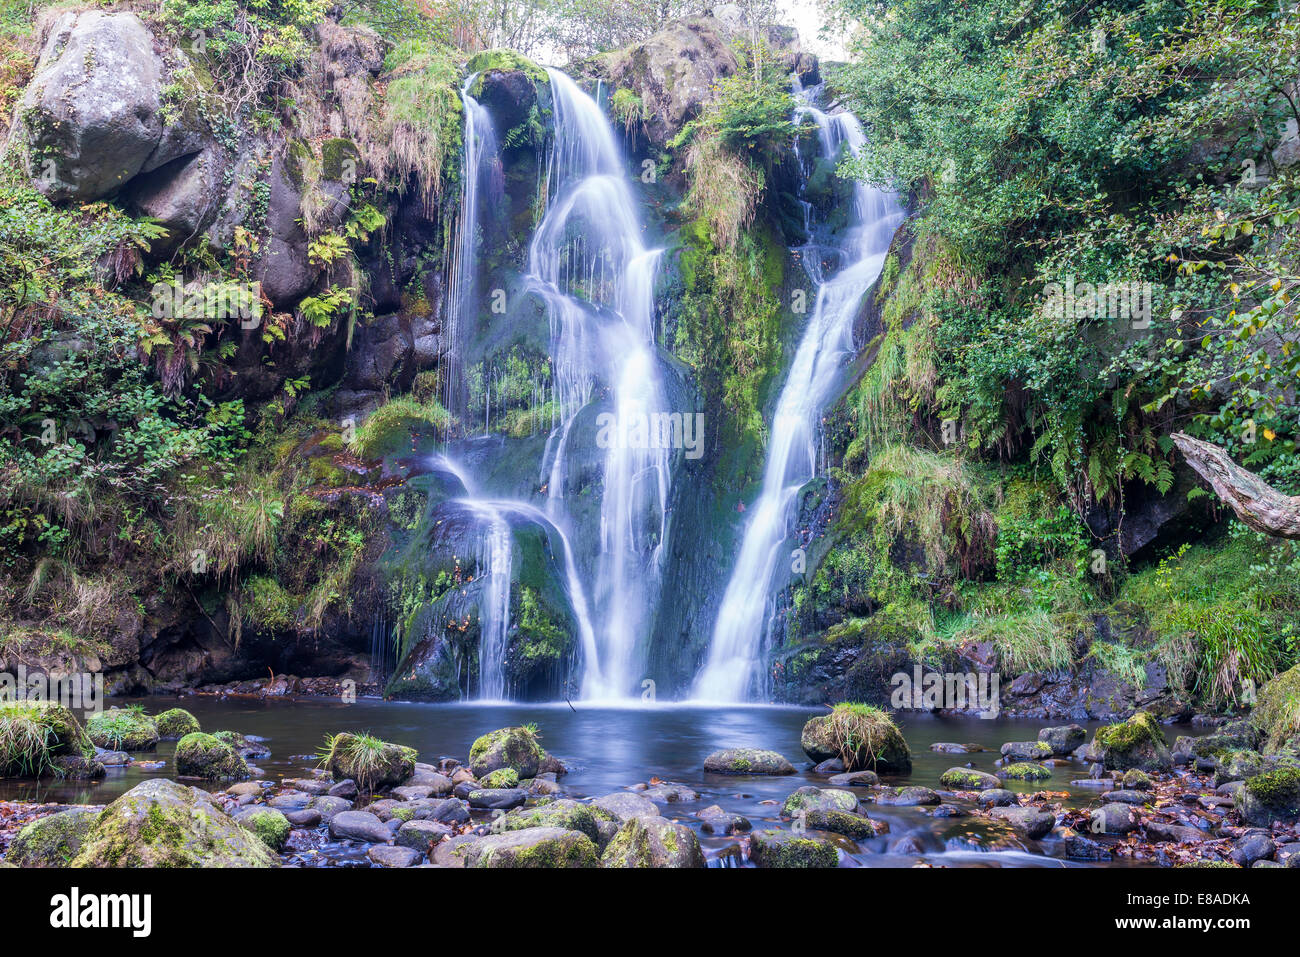 Posforth Gill Waterfall in the Valley of Desolation, Whafedale Yorkshire Dales, UK Stock Photo